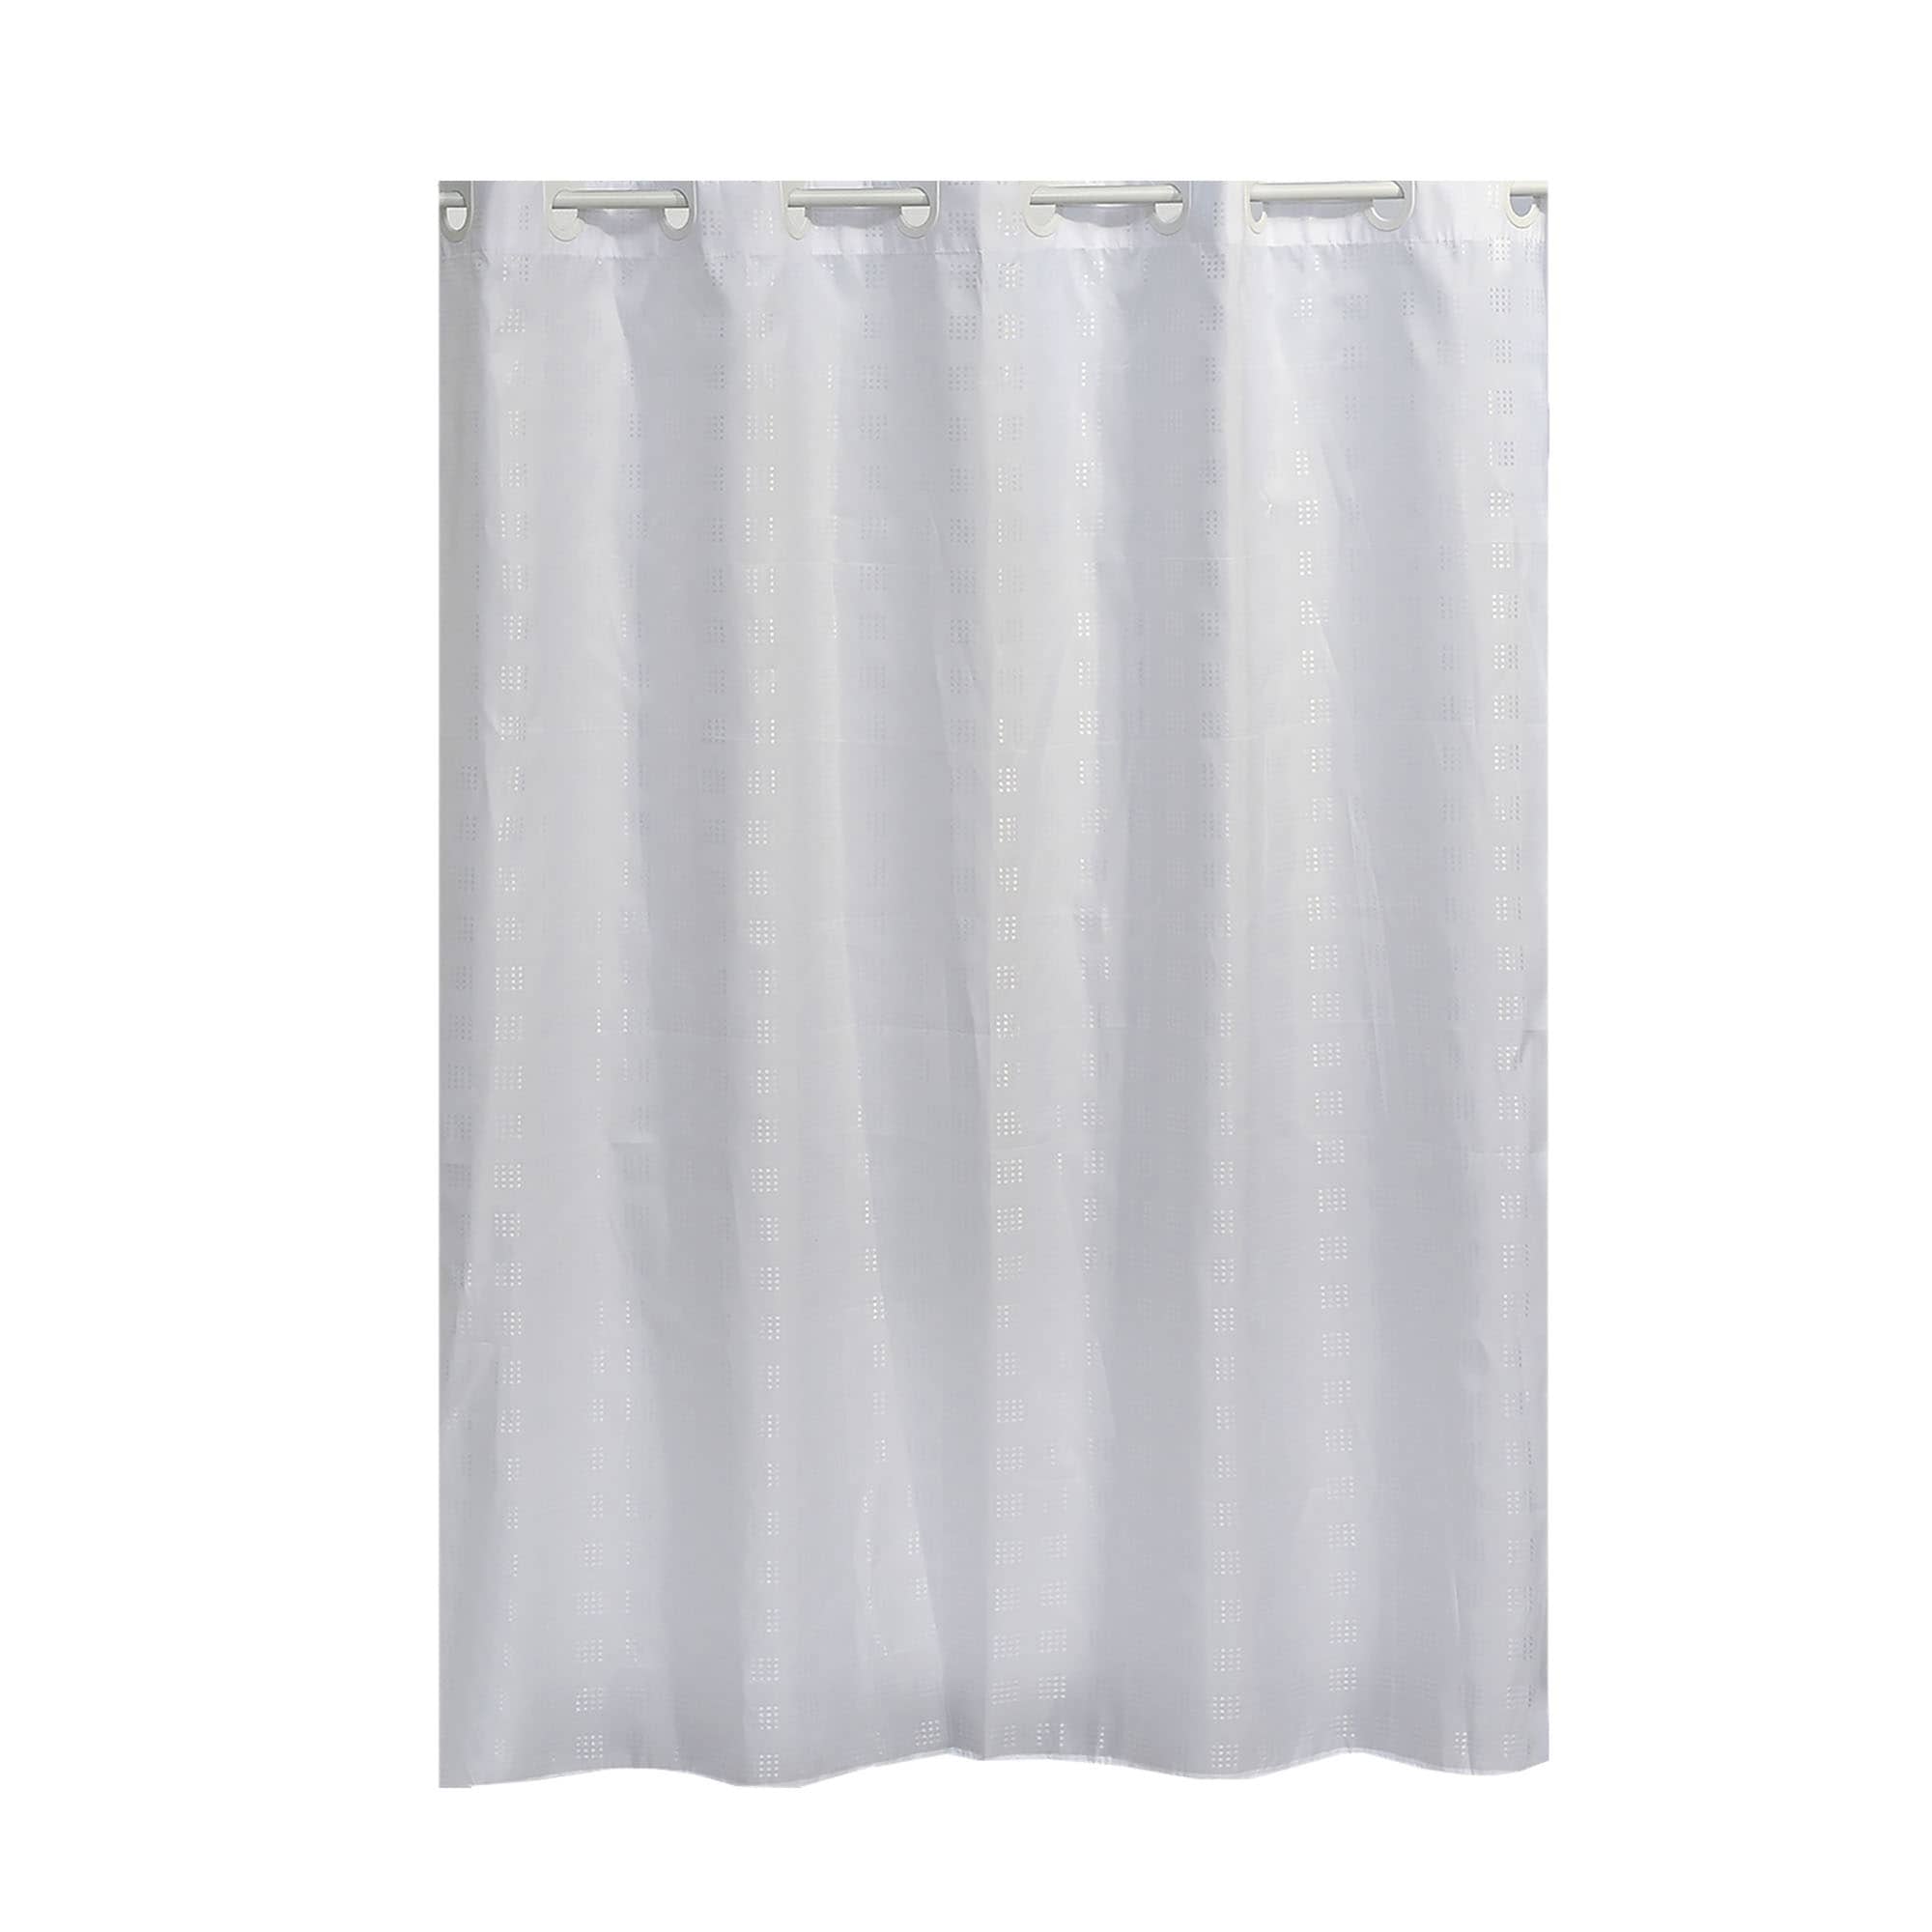 https://ak1.ostkcdn.com/images/products/is/images/direct/922625ce2f07817998093146c6381e3867444520/Extra-Long-Shower-Curtain-Polyester-Hook-Less-Cubic-79%22L-x-71%22W.jpg